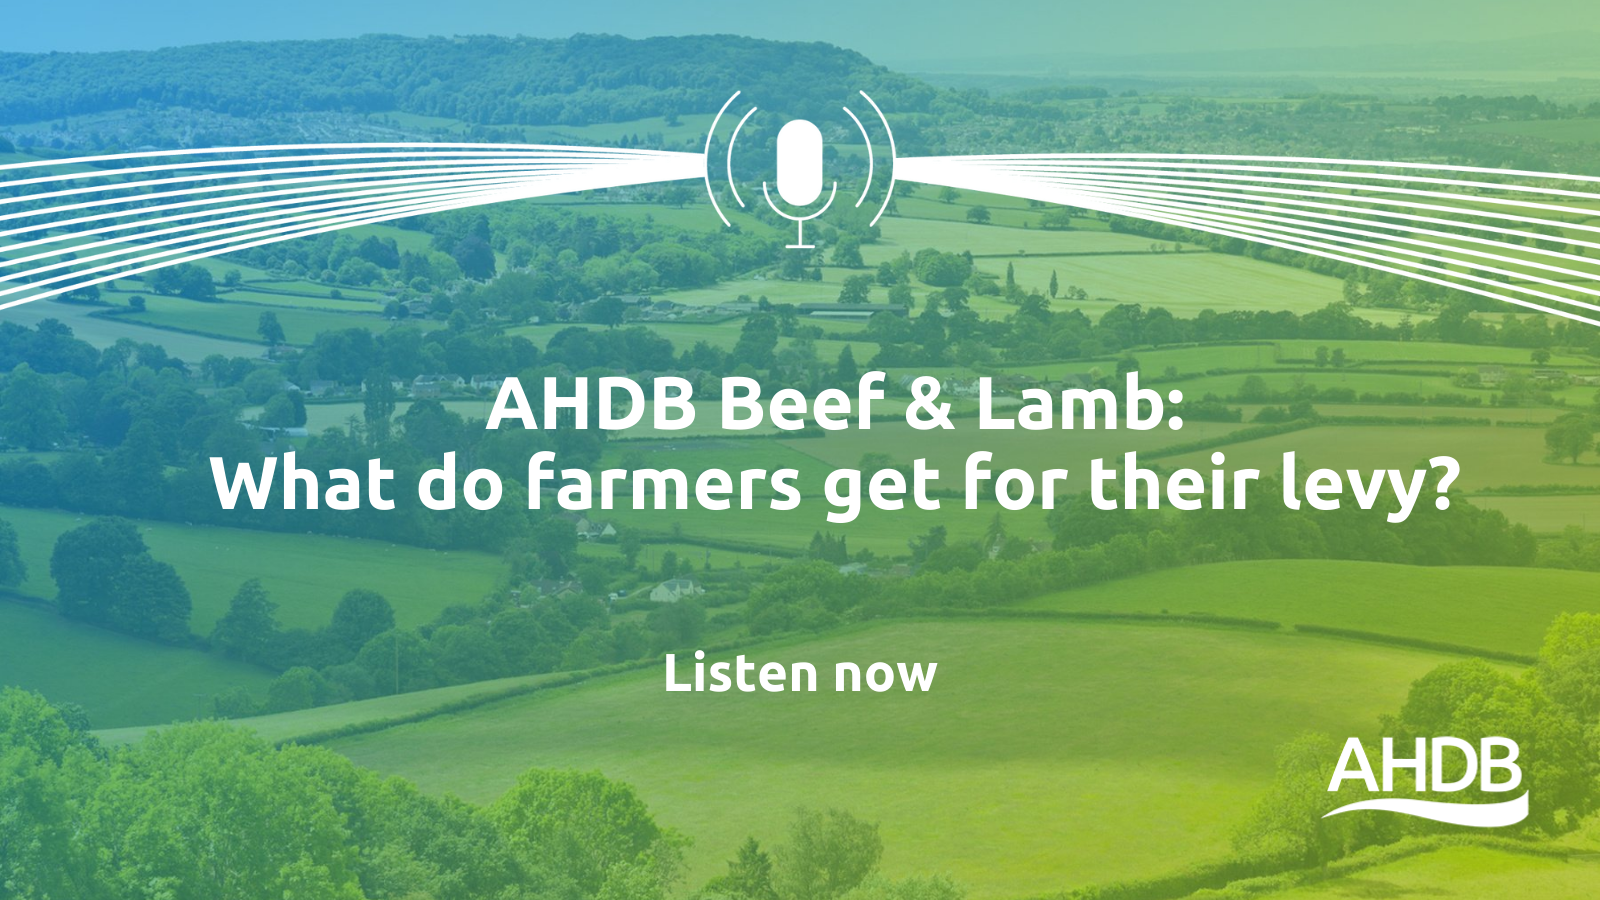 Listen to a podcast where two farmers talk about some of the AHDB services they use